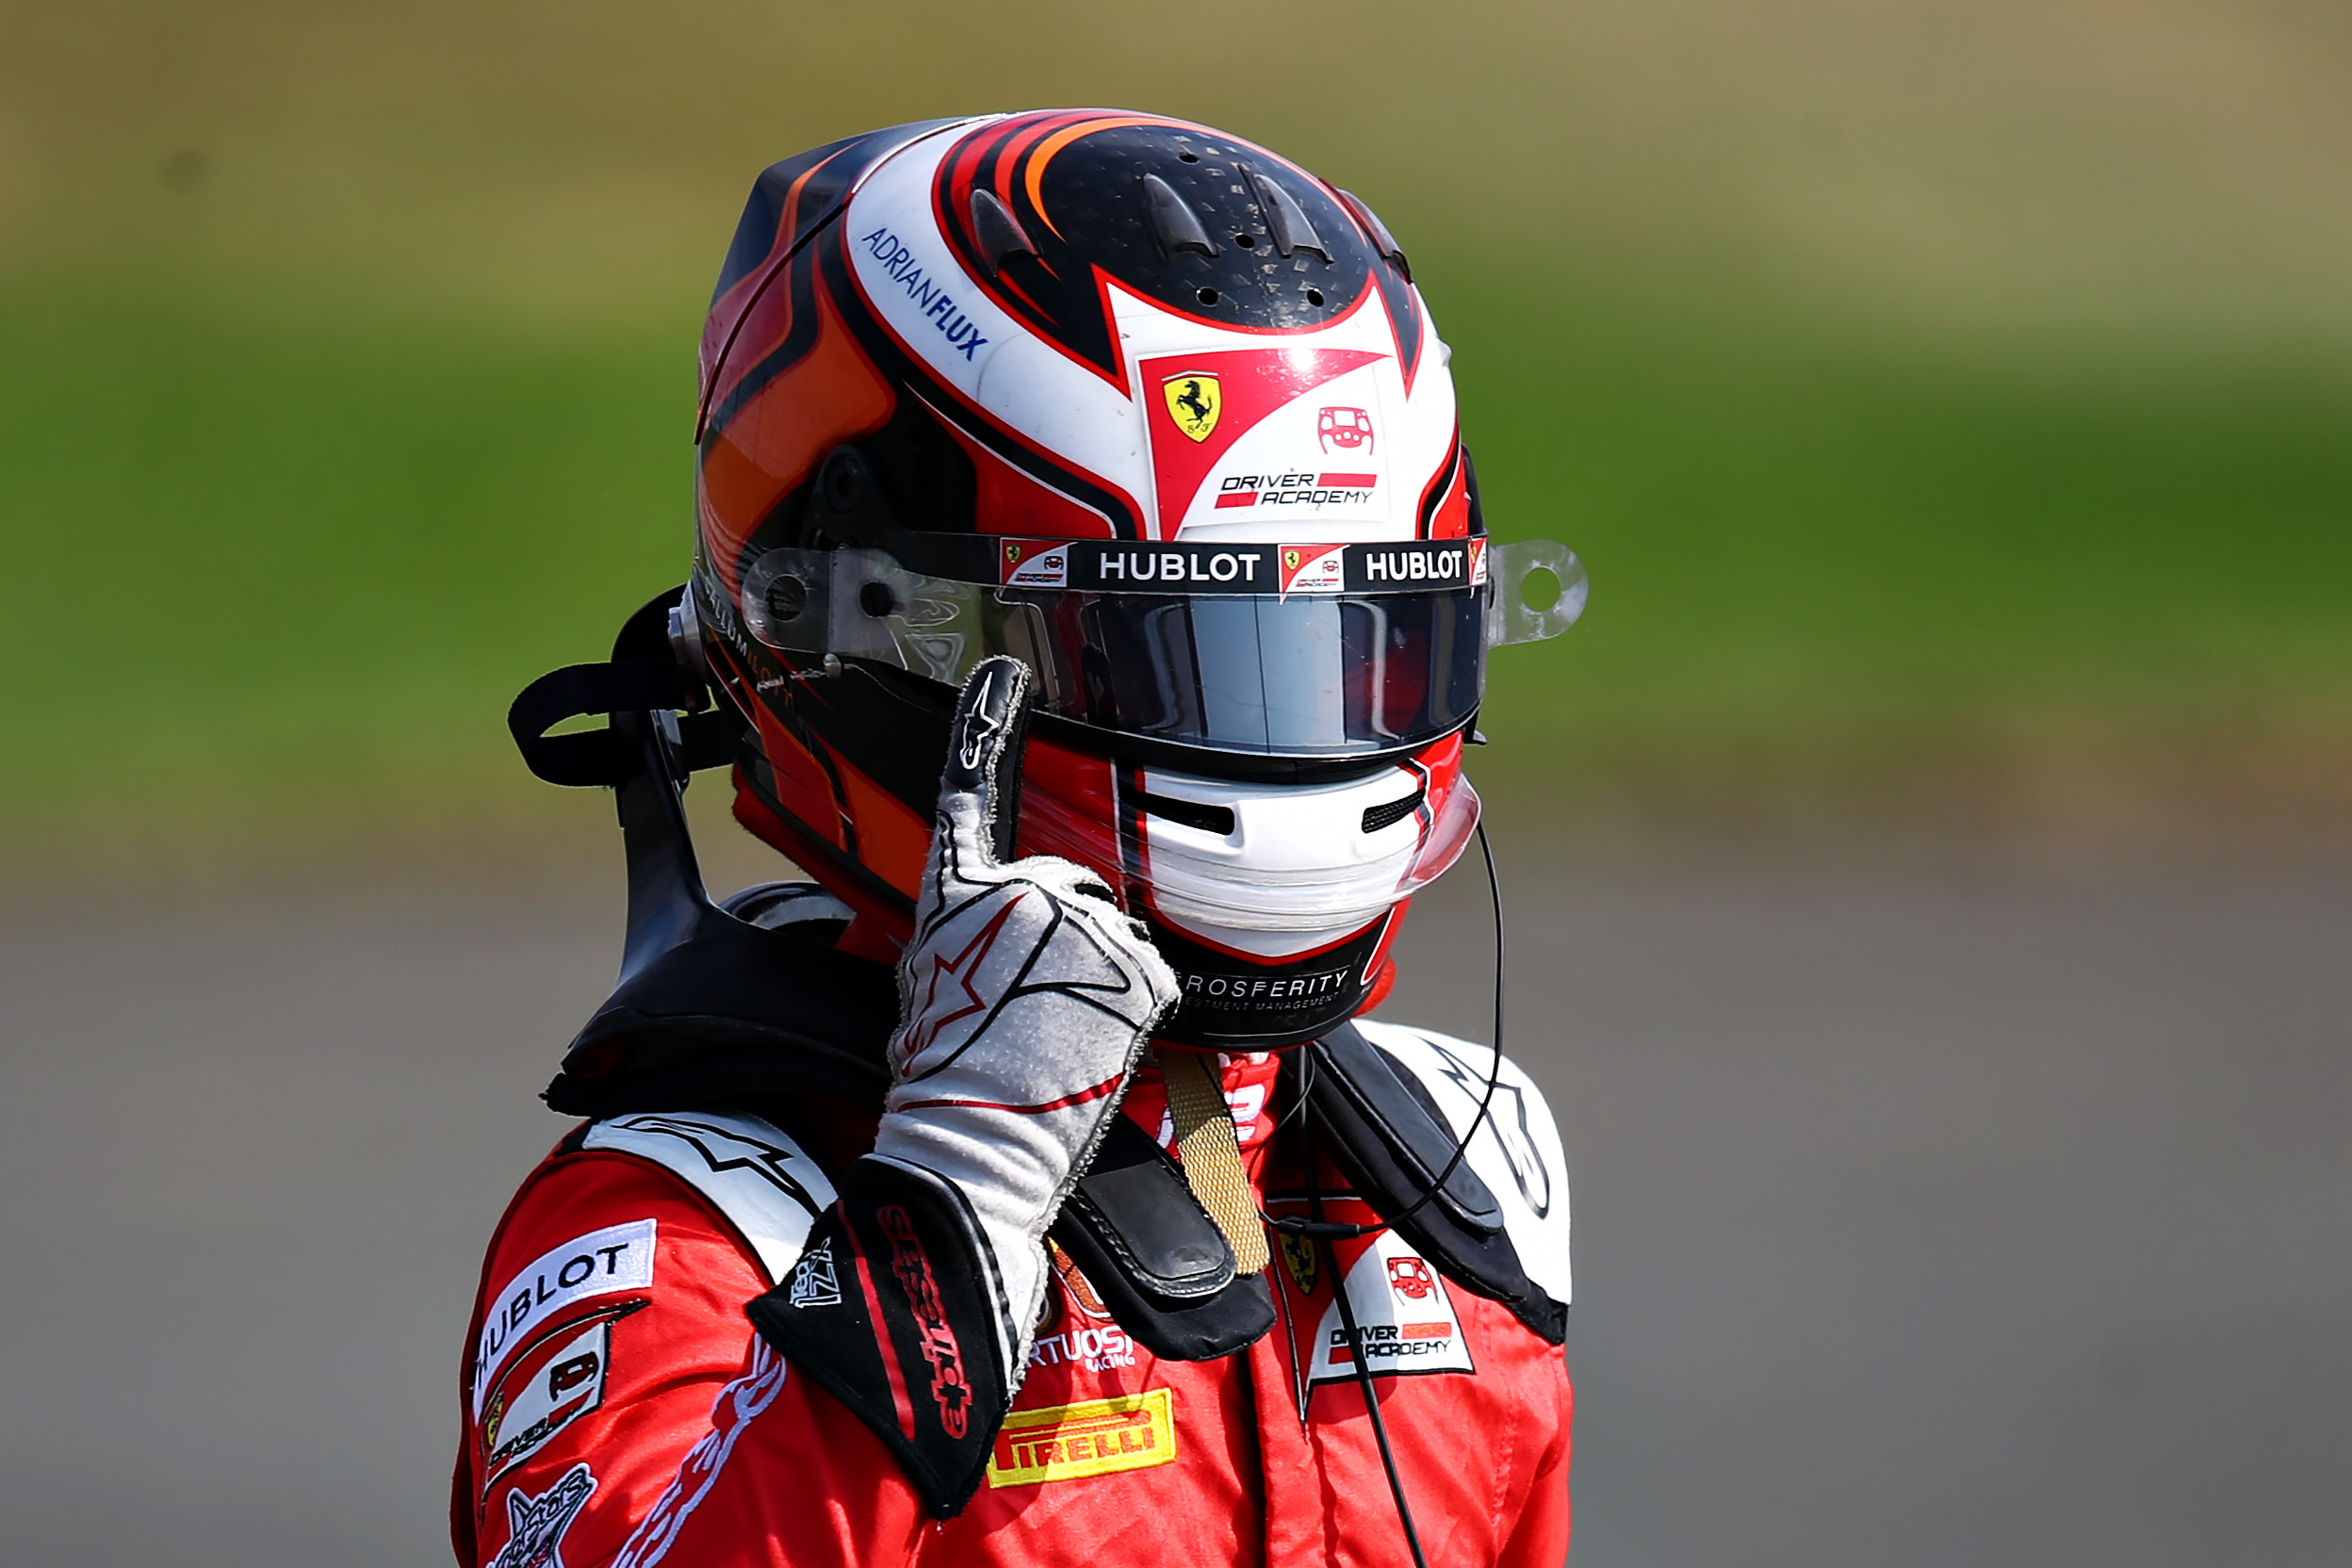 Callum Ilott puts his finger to his head while wearing a helmet